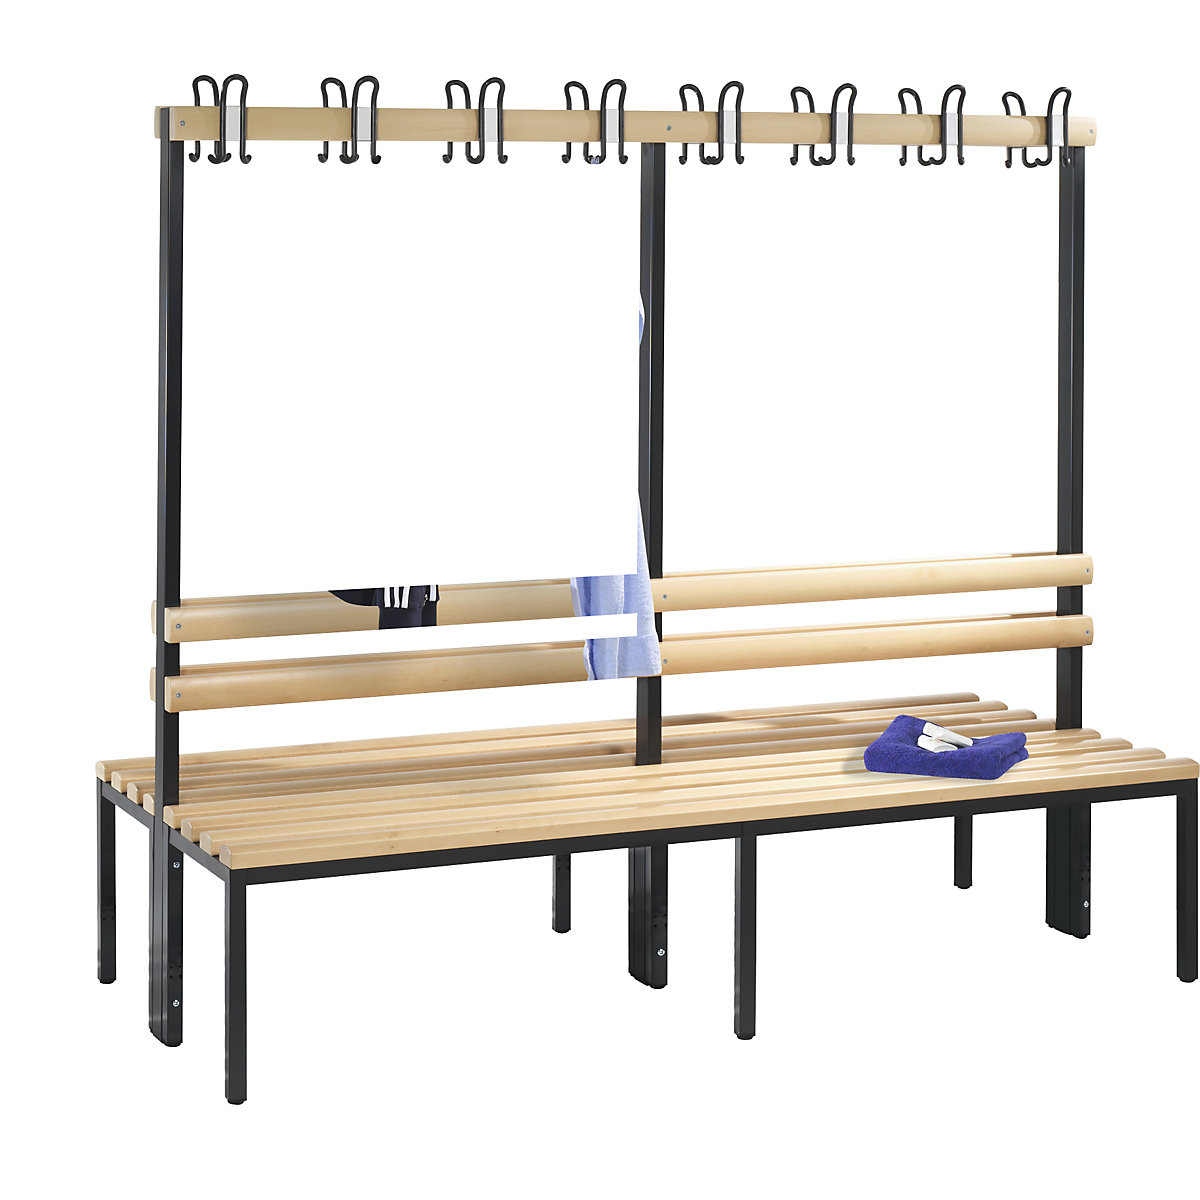 BASIC cloakroom bench, double sided – C+P, hook rail, beech, length 1960 mm-1